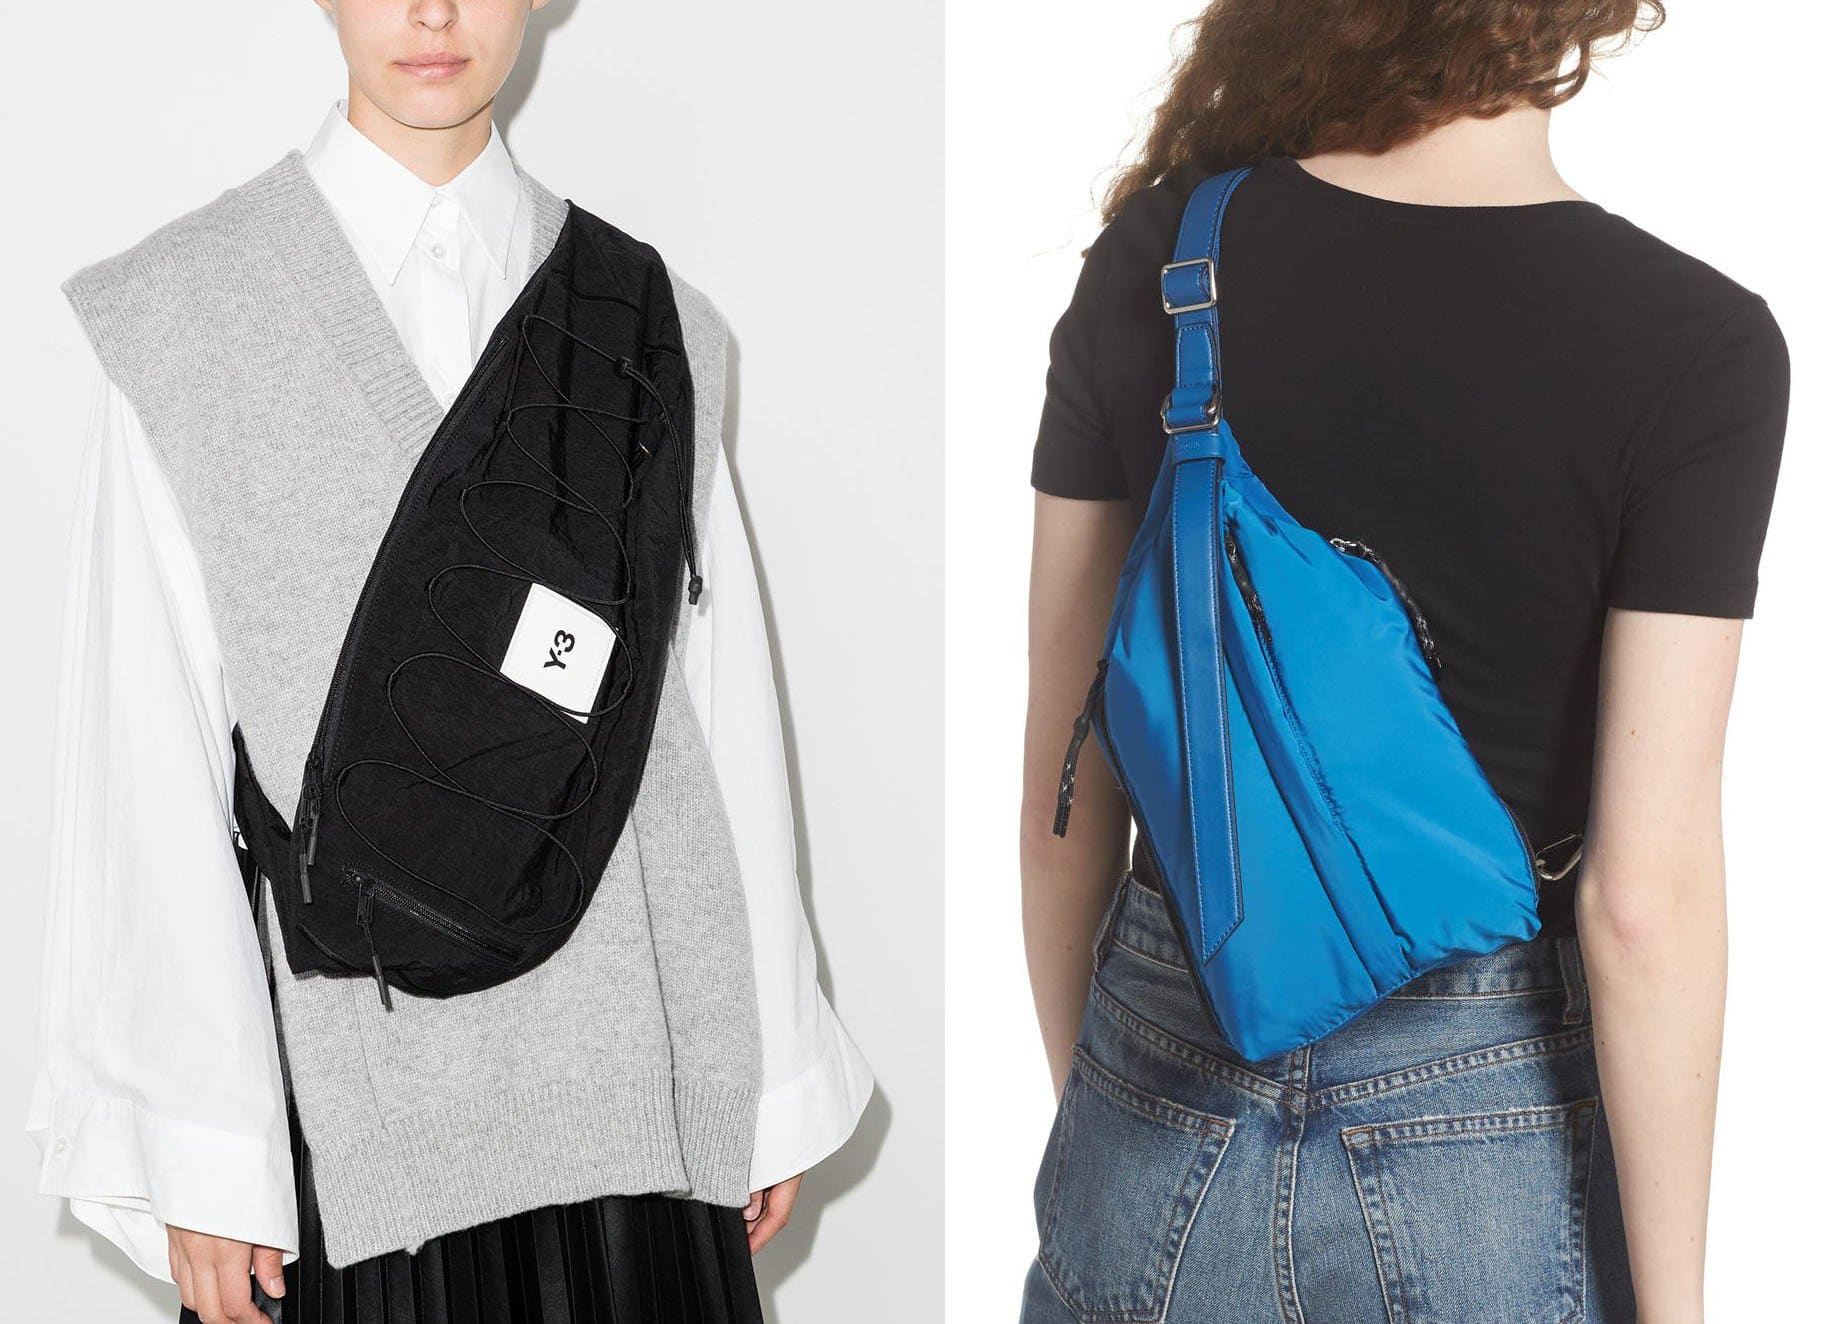 Typically used for traveling, sling bags are now considered functional fashion accessories